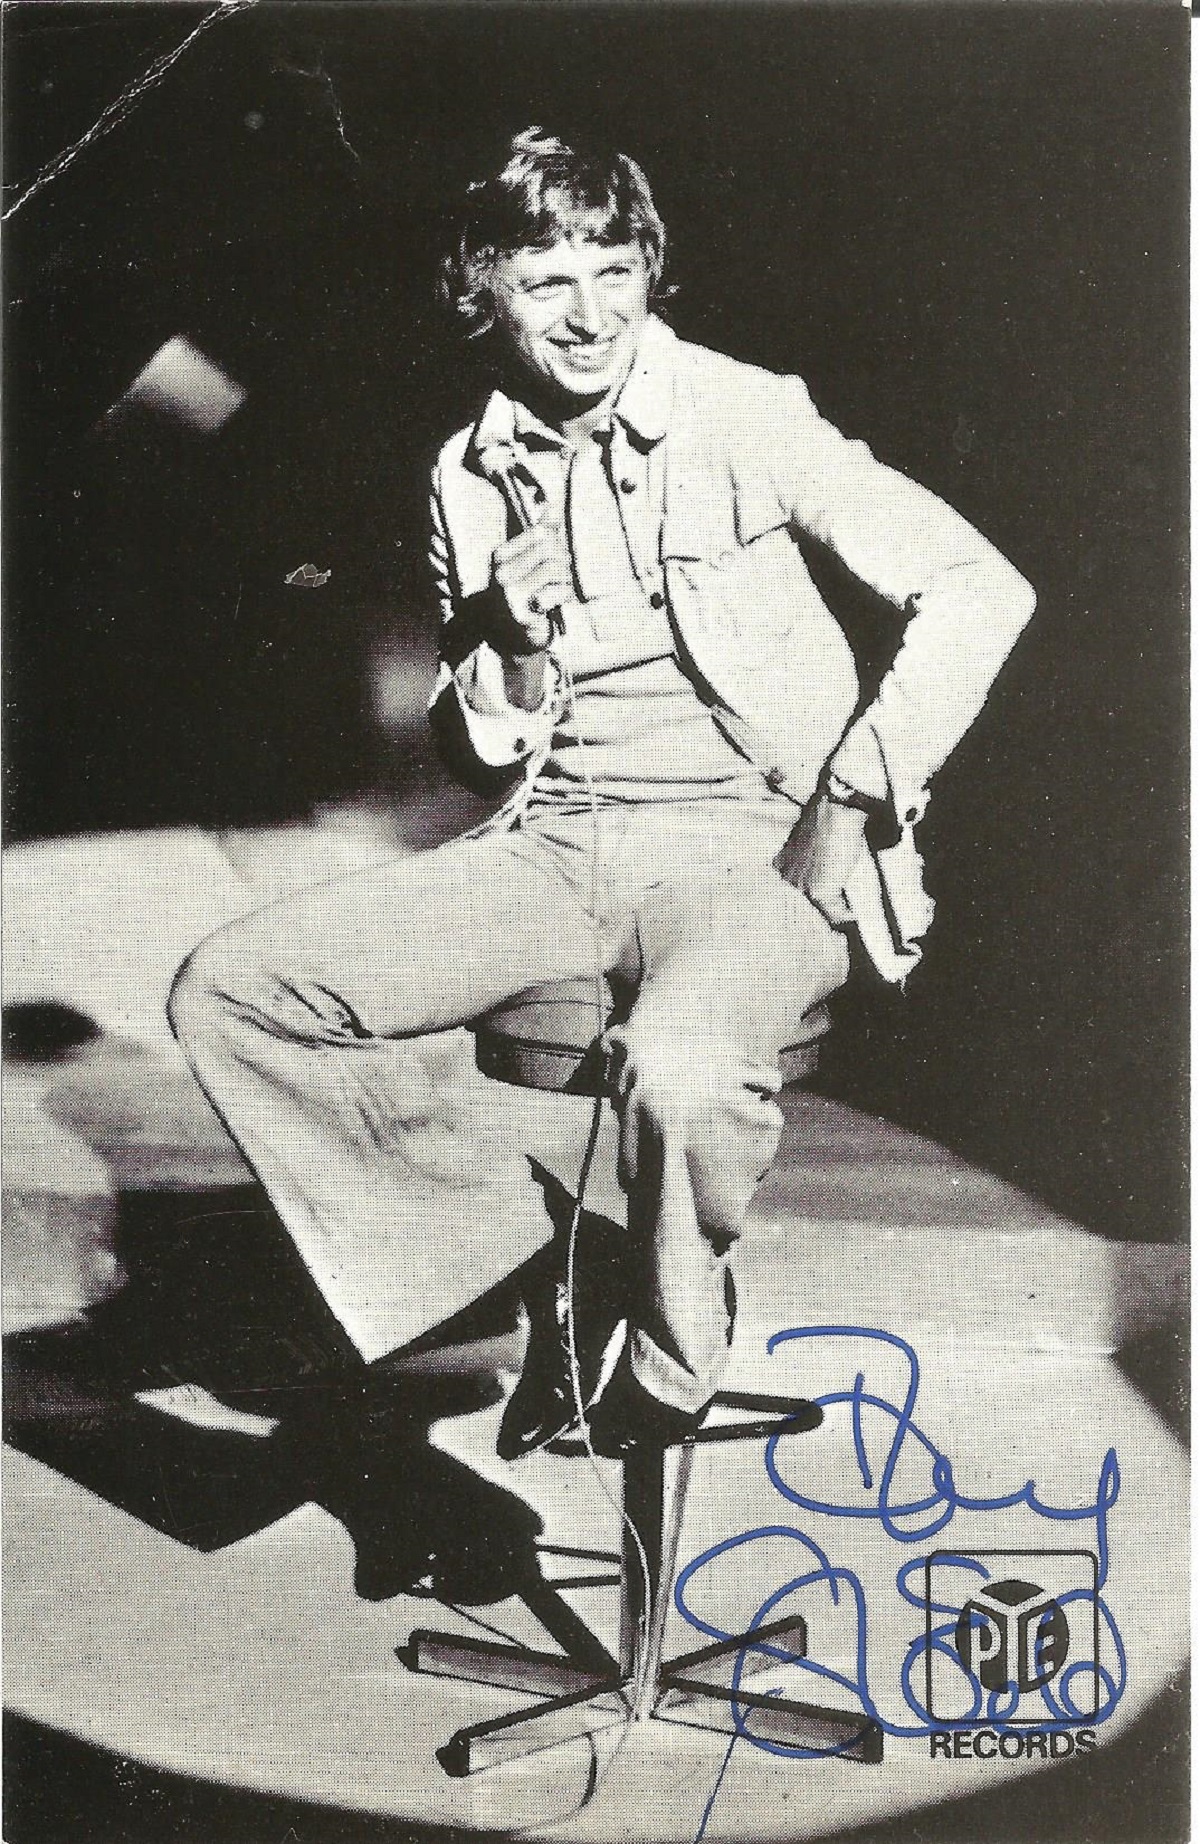 TOMMY STEELE English Rock Singer signed PYE Promo Photo . Good condition. All autographs come with a